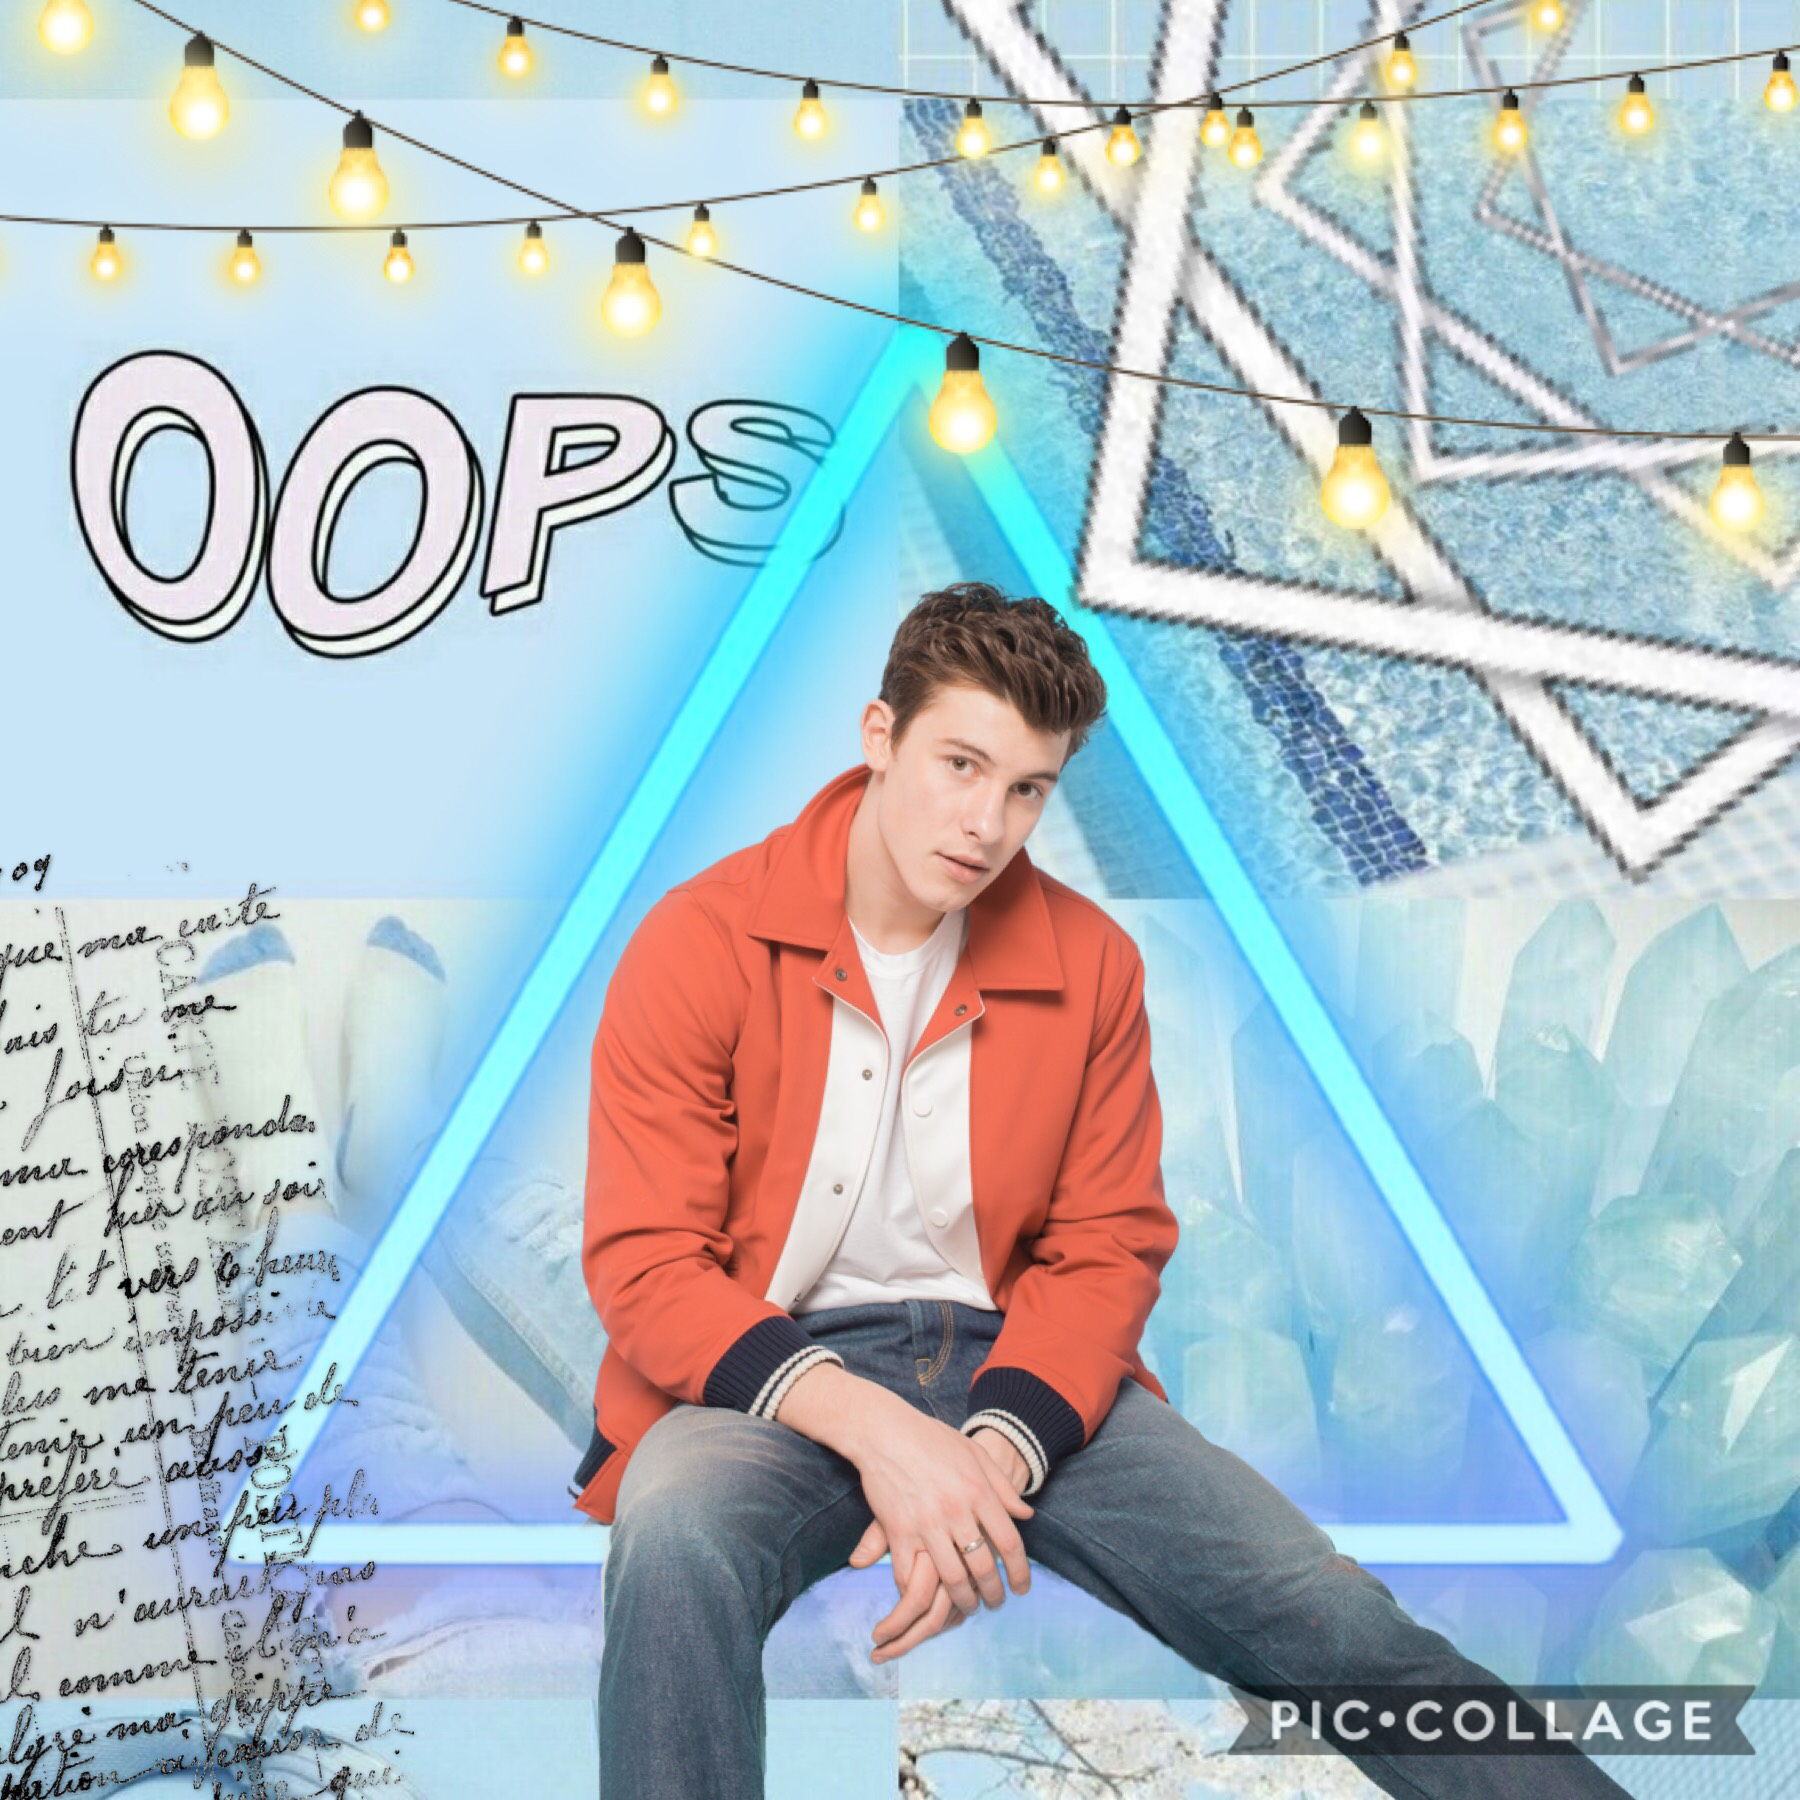 I think this will be the last Shawn mendes collage then I do a new theme